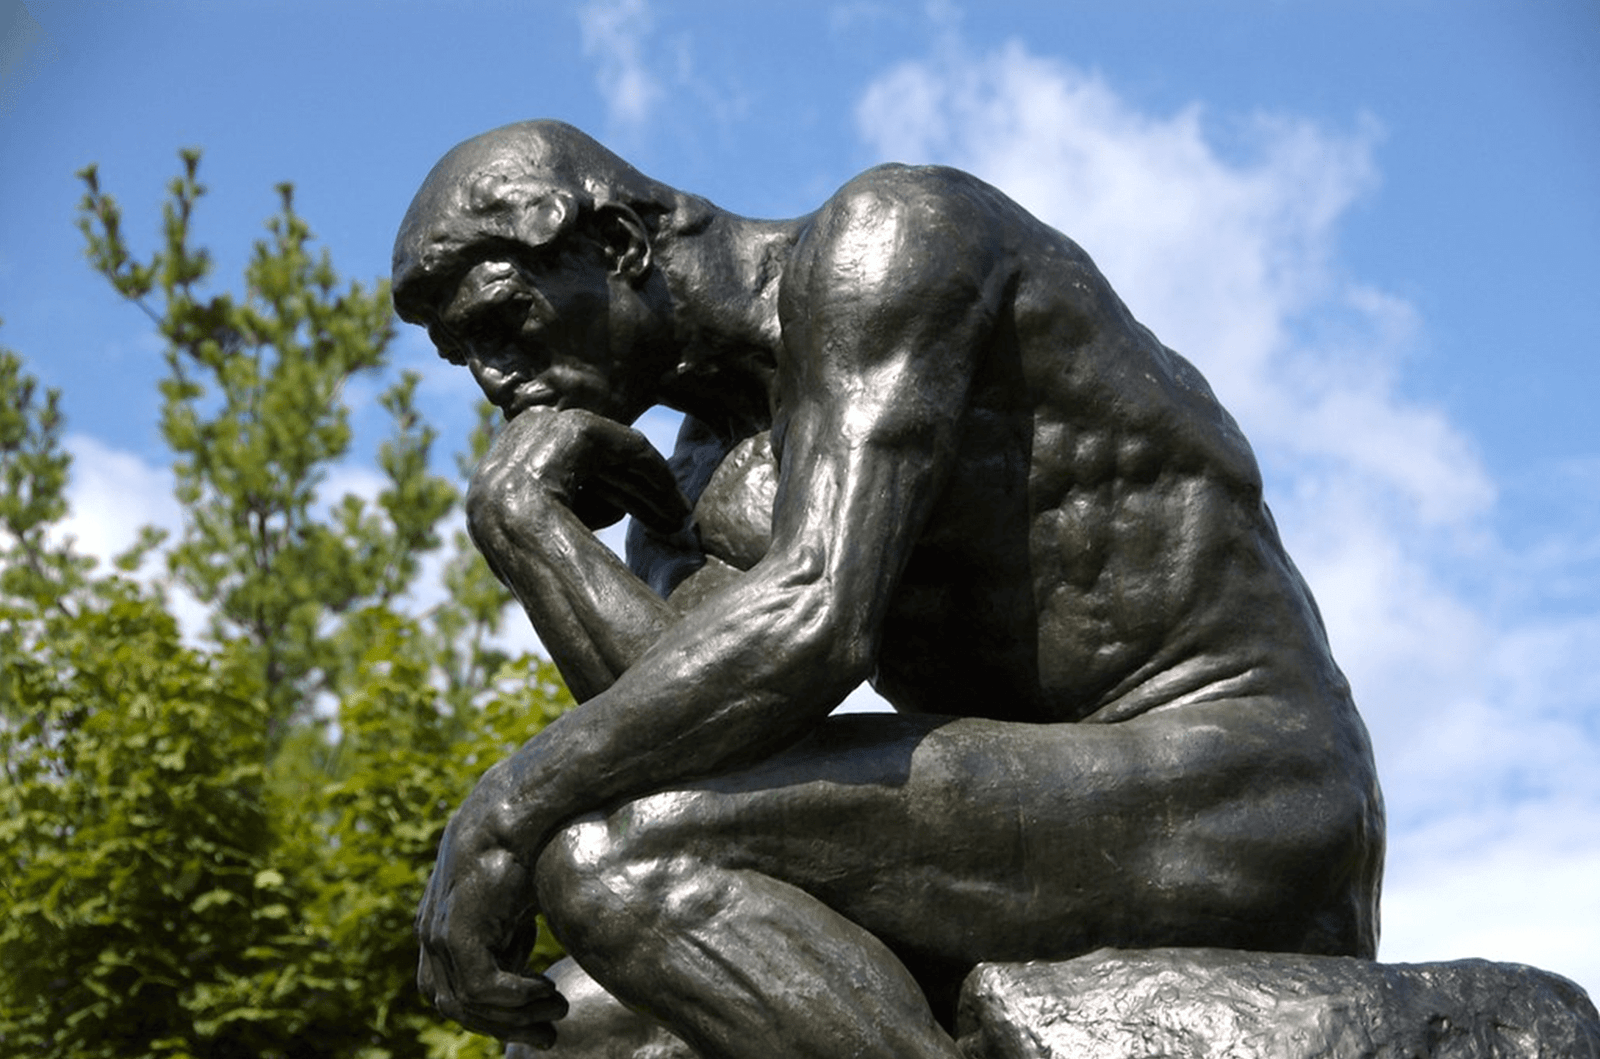 The Thinker statue